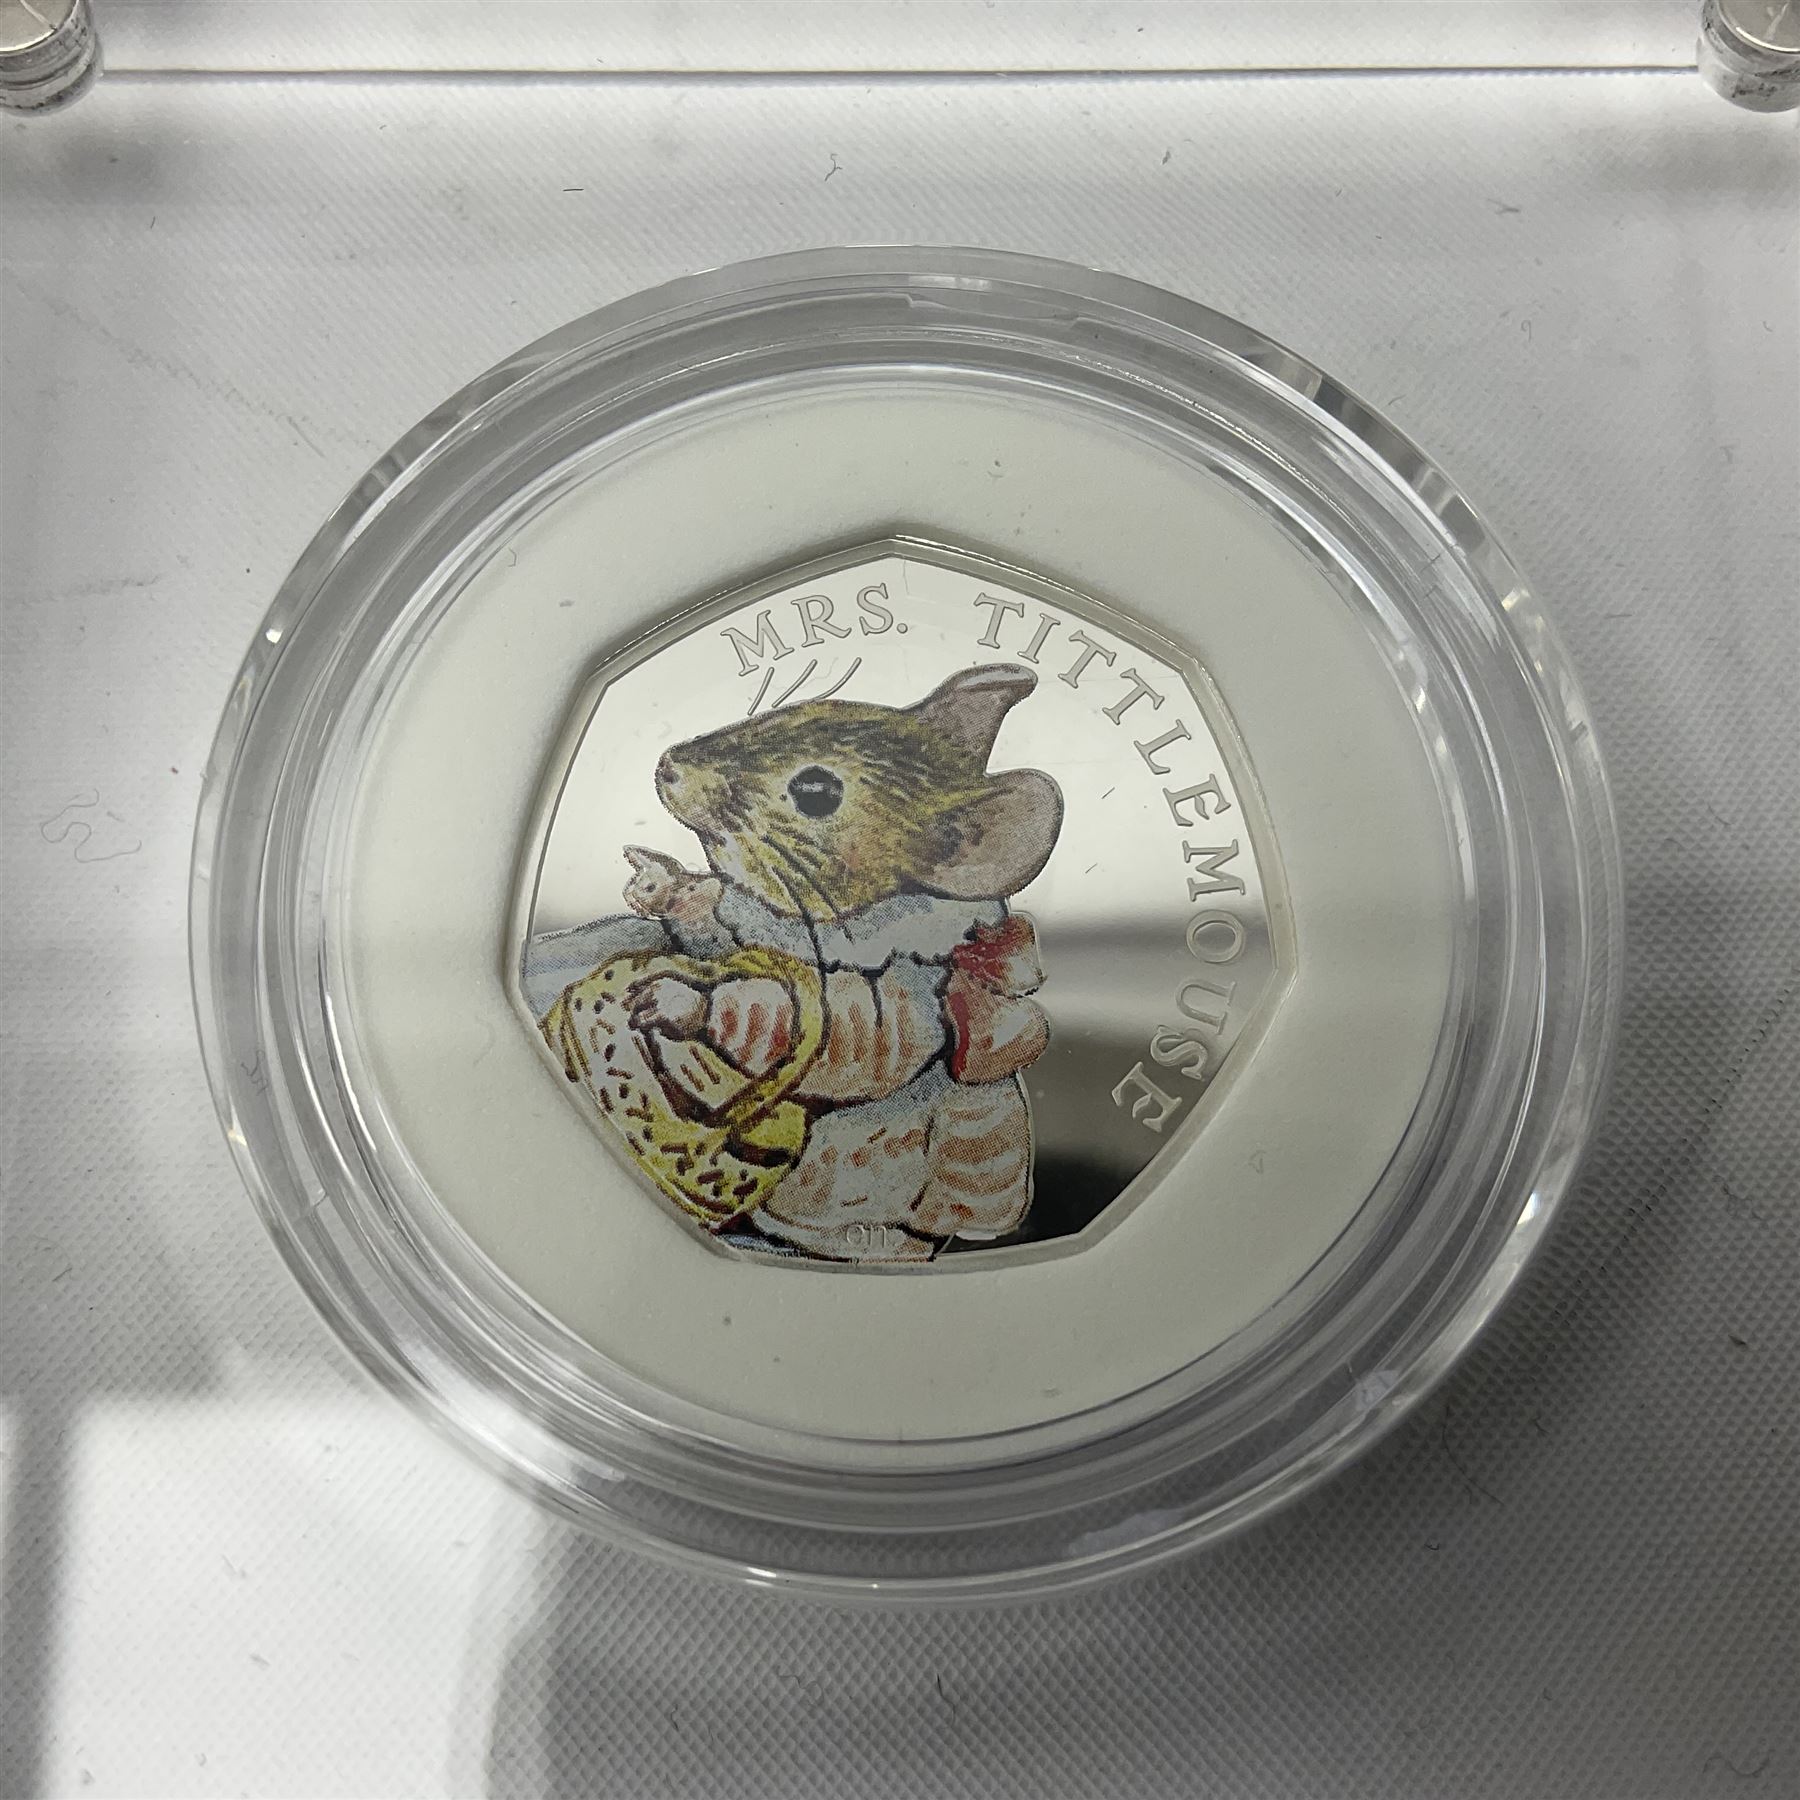 The Royal Mint United Kingdom 2018 'Mrs Tittlemouse' silver proof fifty pence coin - Image 2 of 4